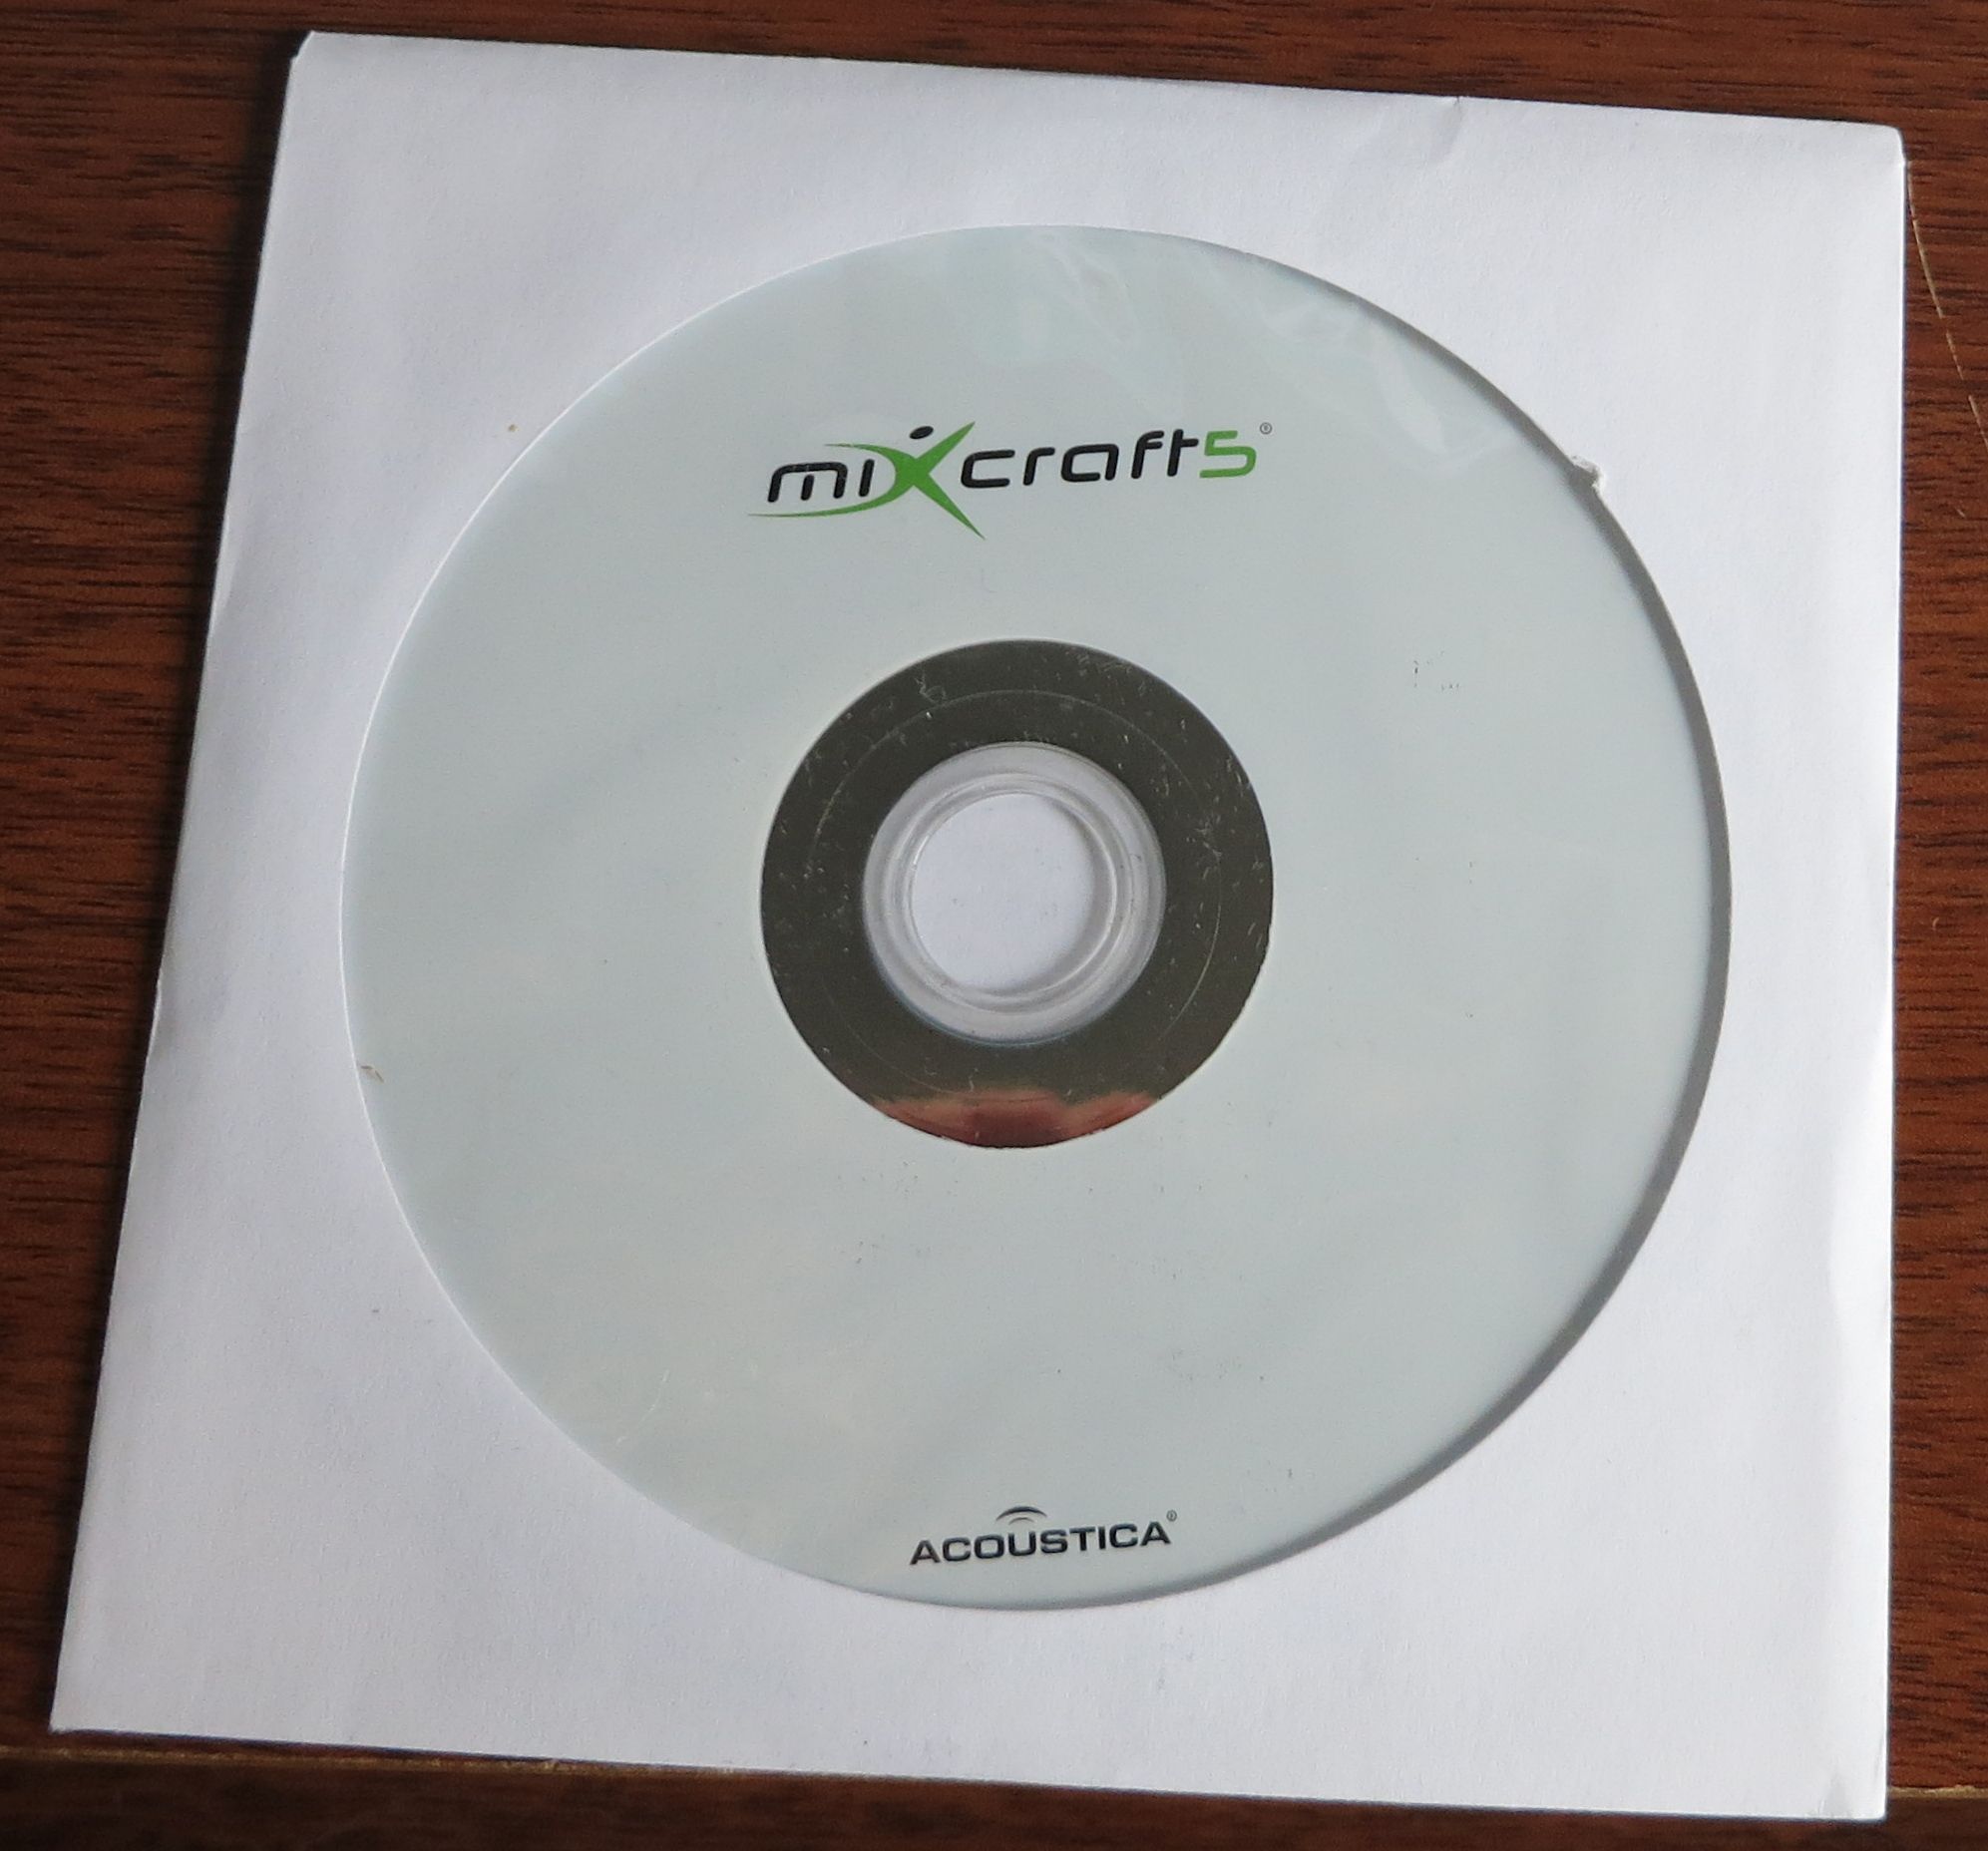 Mixcraft 5 music recording software for Windows